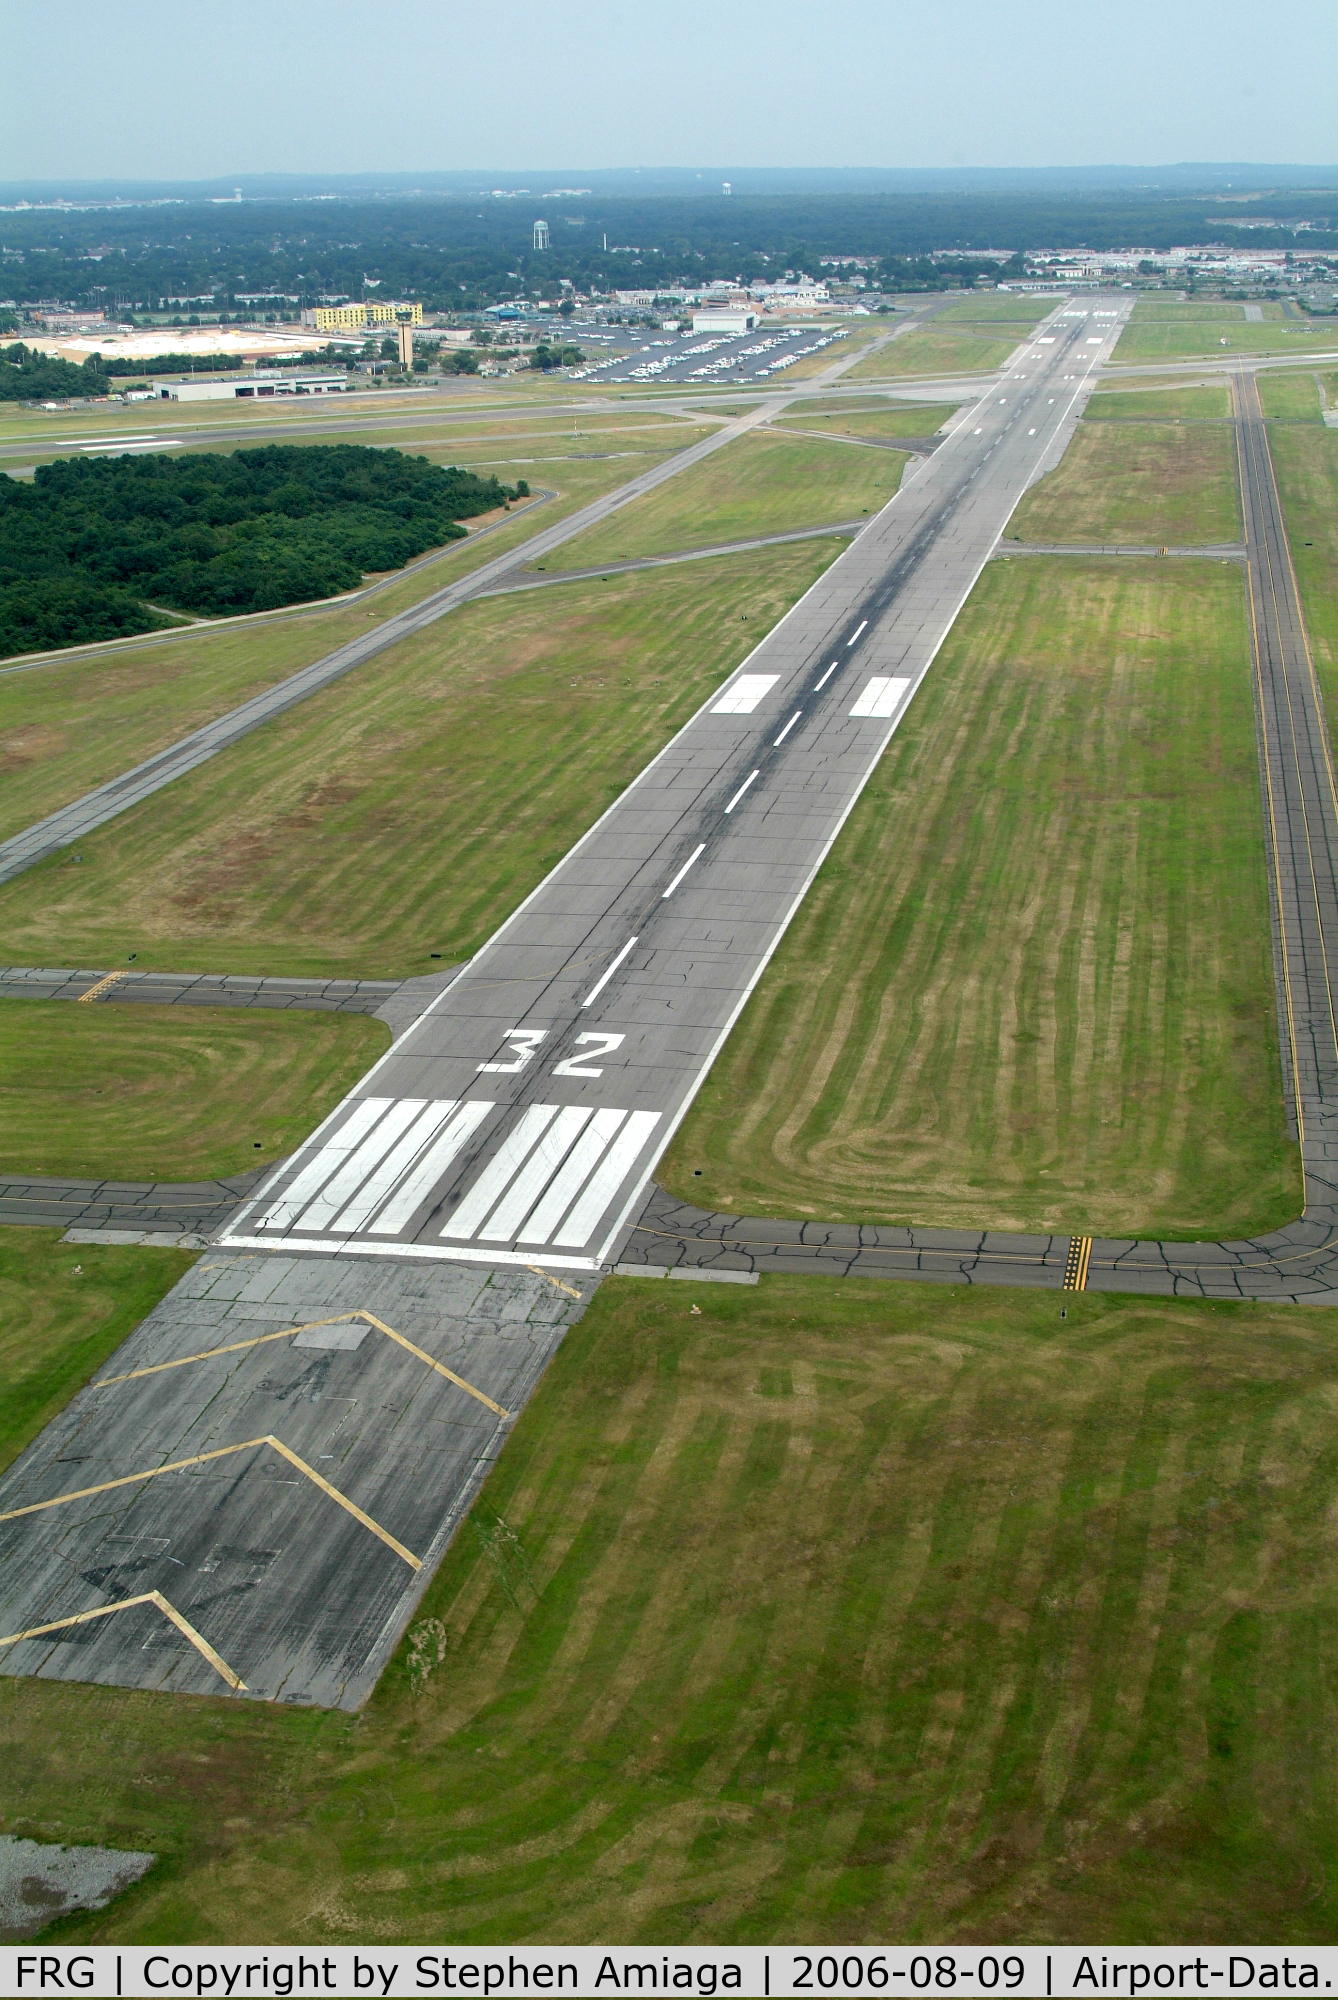 Republic Airport (FRG) - RWY 32 from the arrival end as seen from the helo...